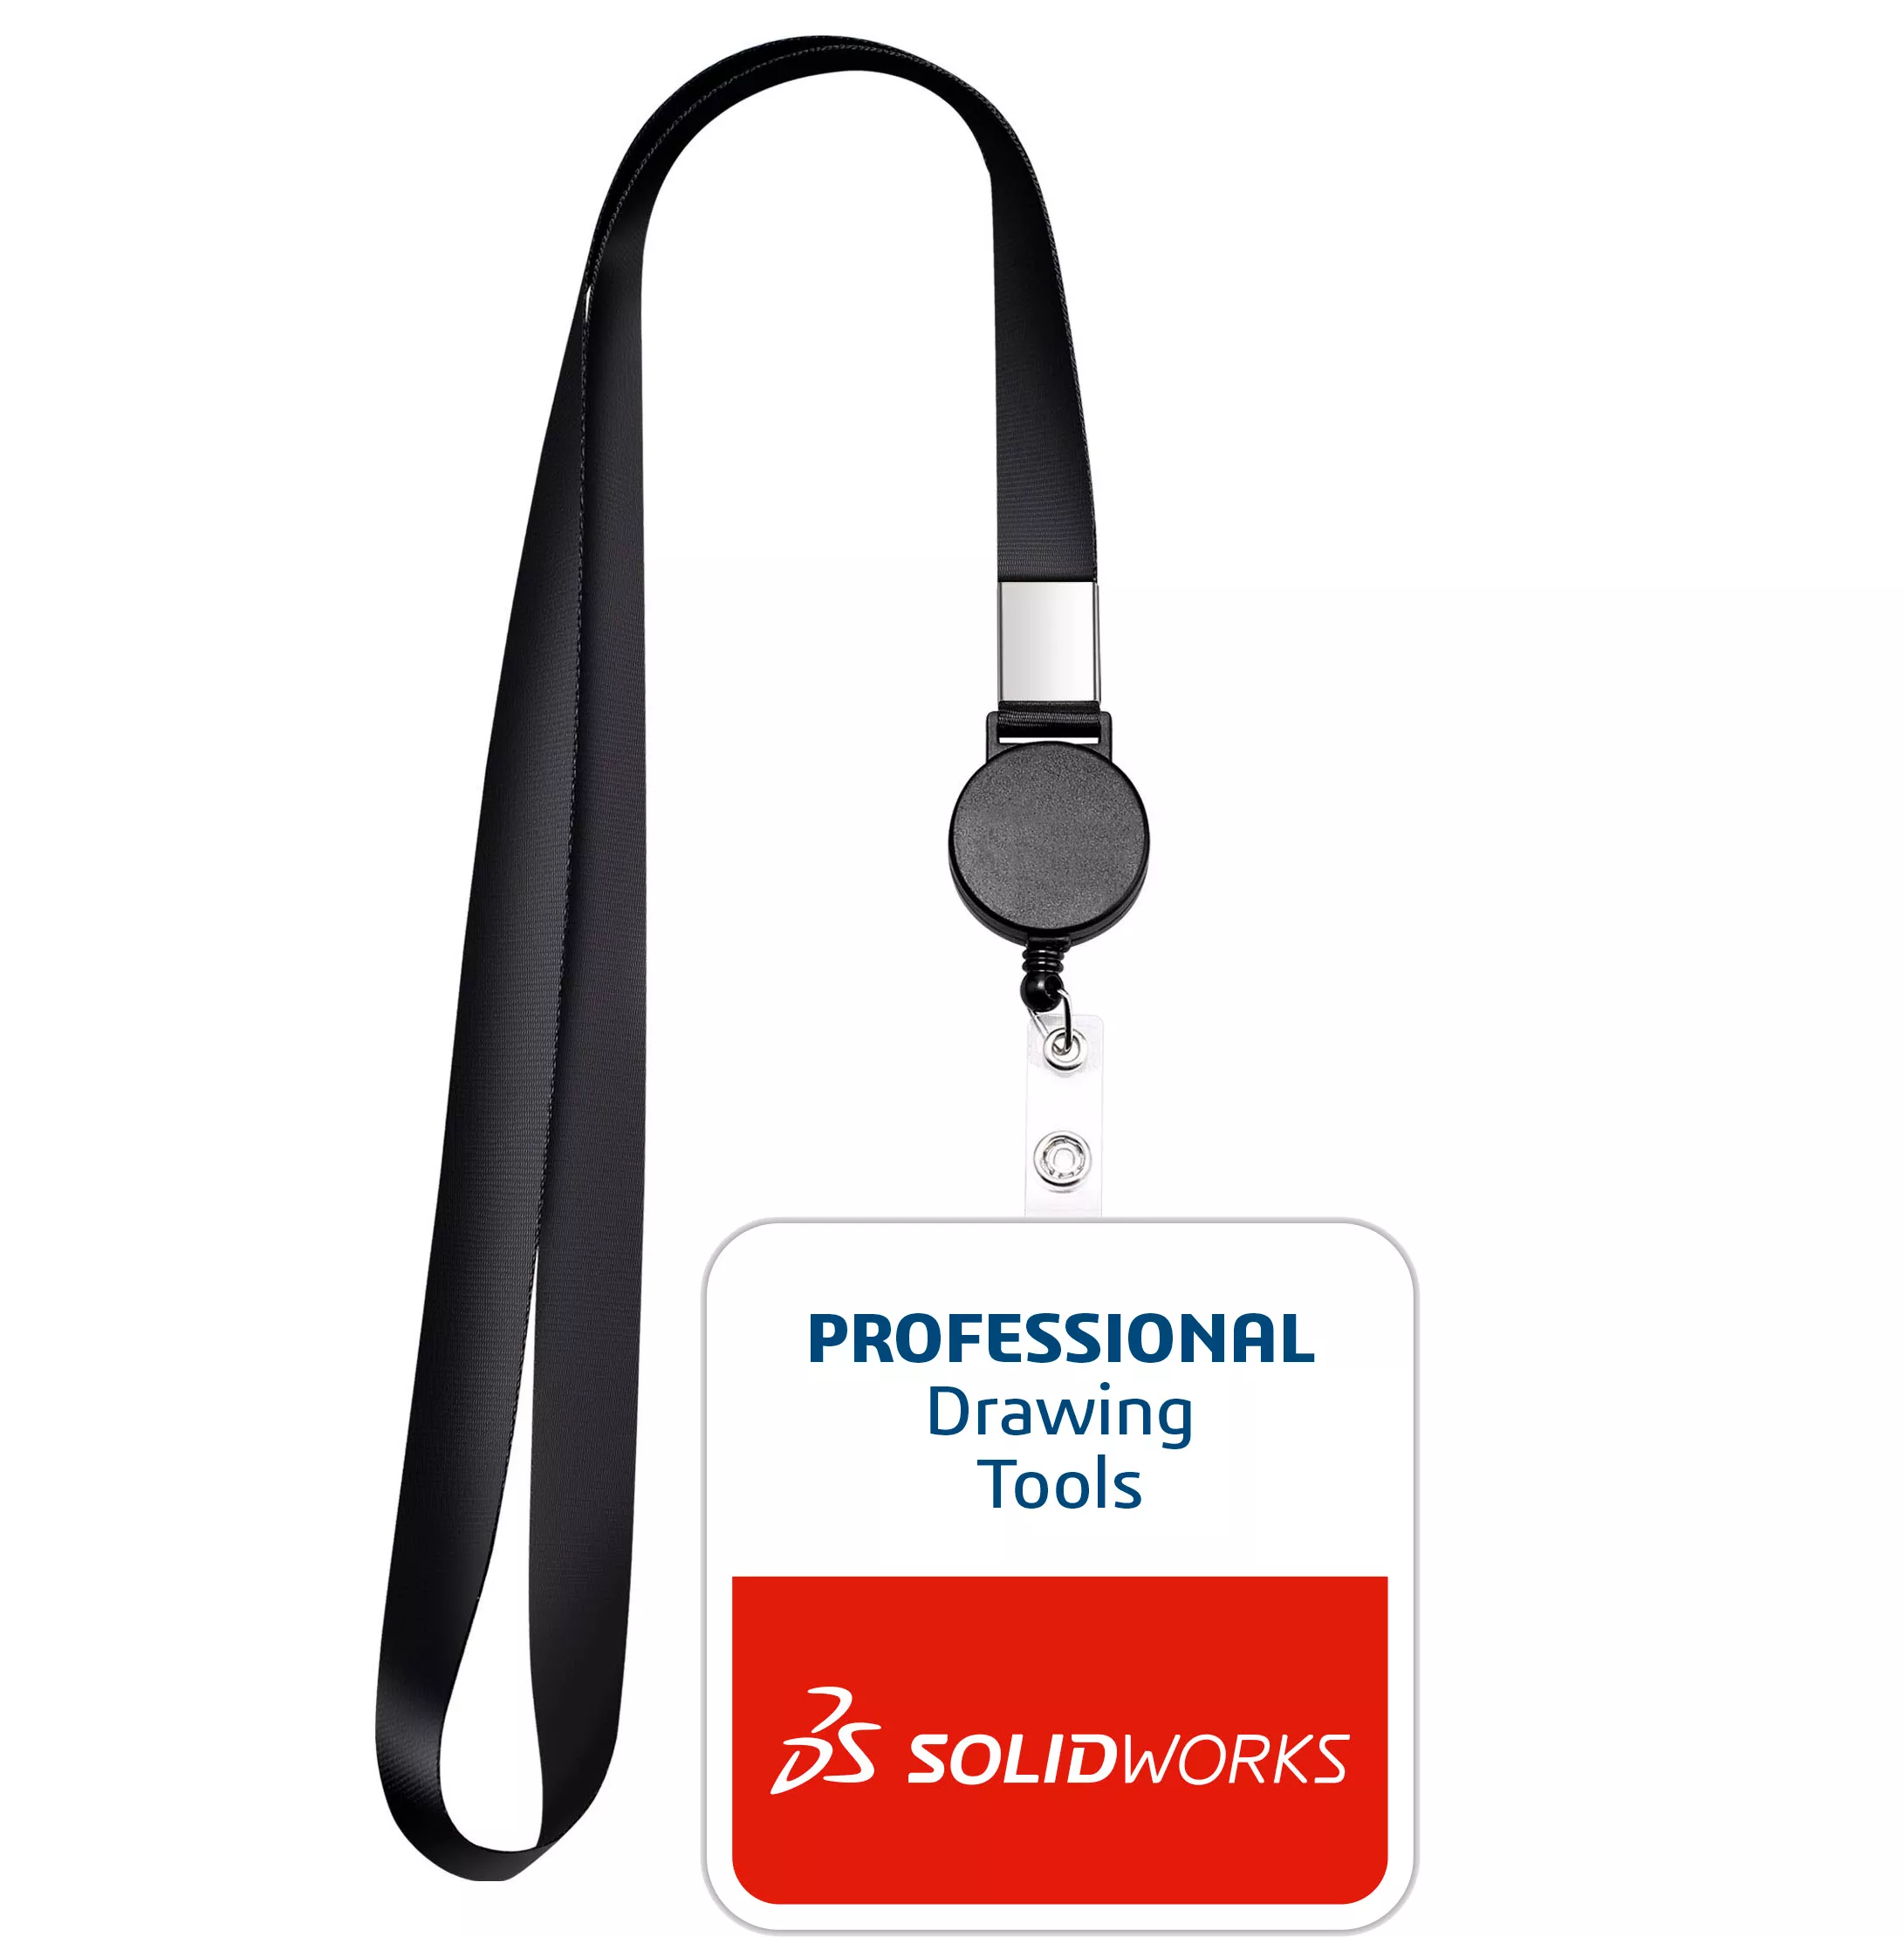 What skills may be required to pass the SOLIDWORKS CSWPA-Drawing Tools exam?